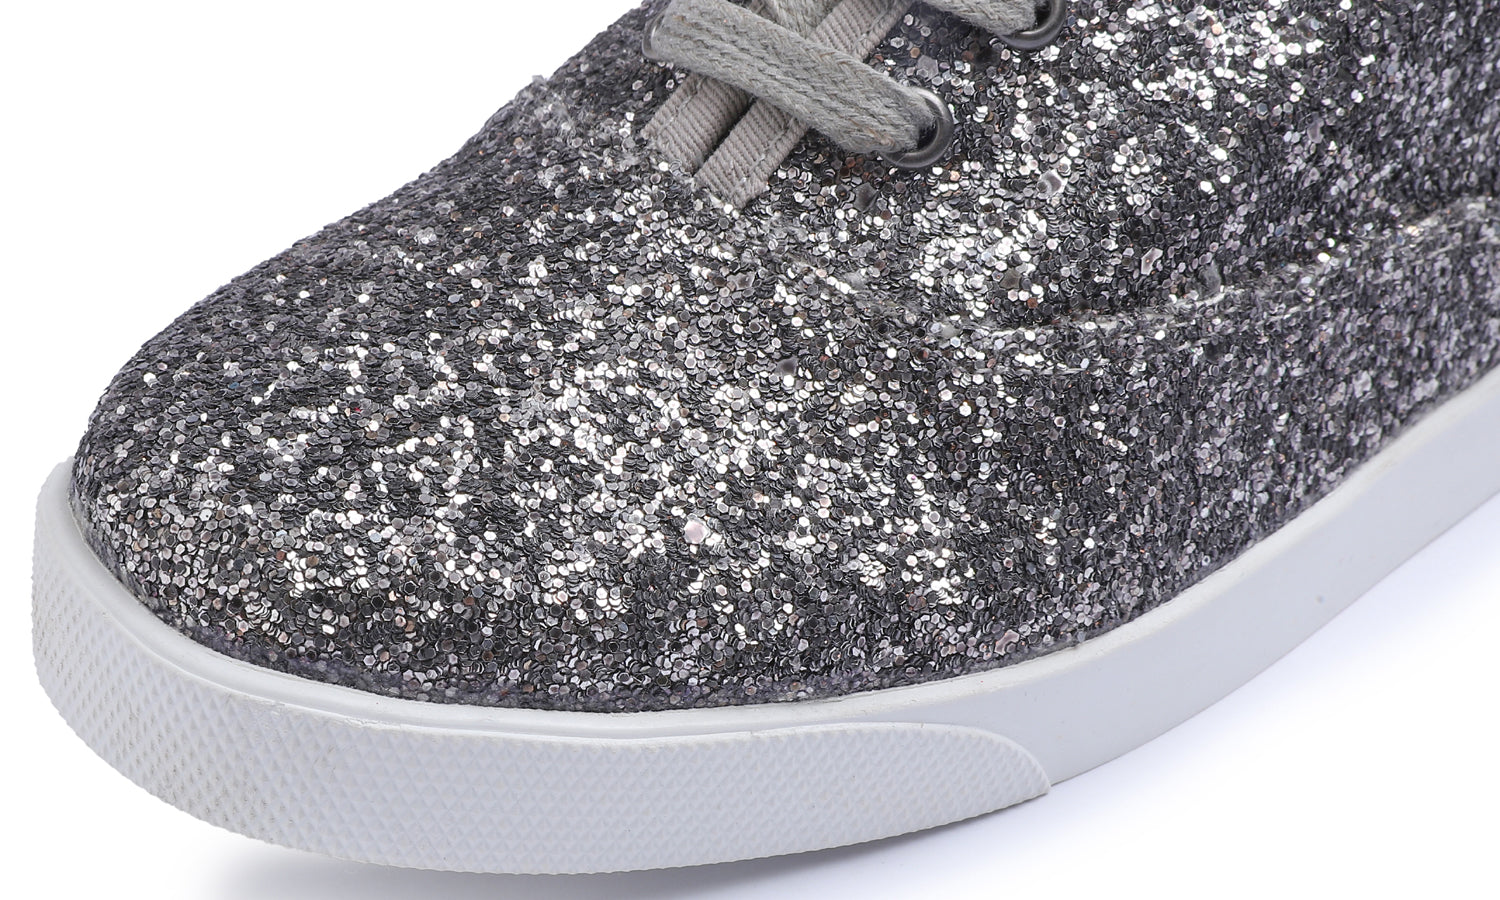 Feversole Women's Fashion Dress Sneakers Party Bling Casual Flats Embellished Shoes Pewter Plimsolls Glitter Lace